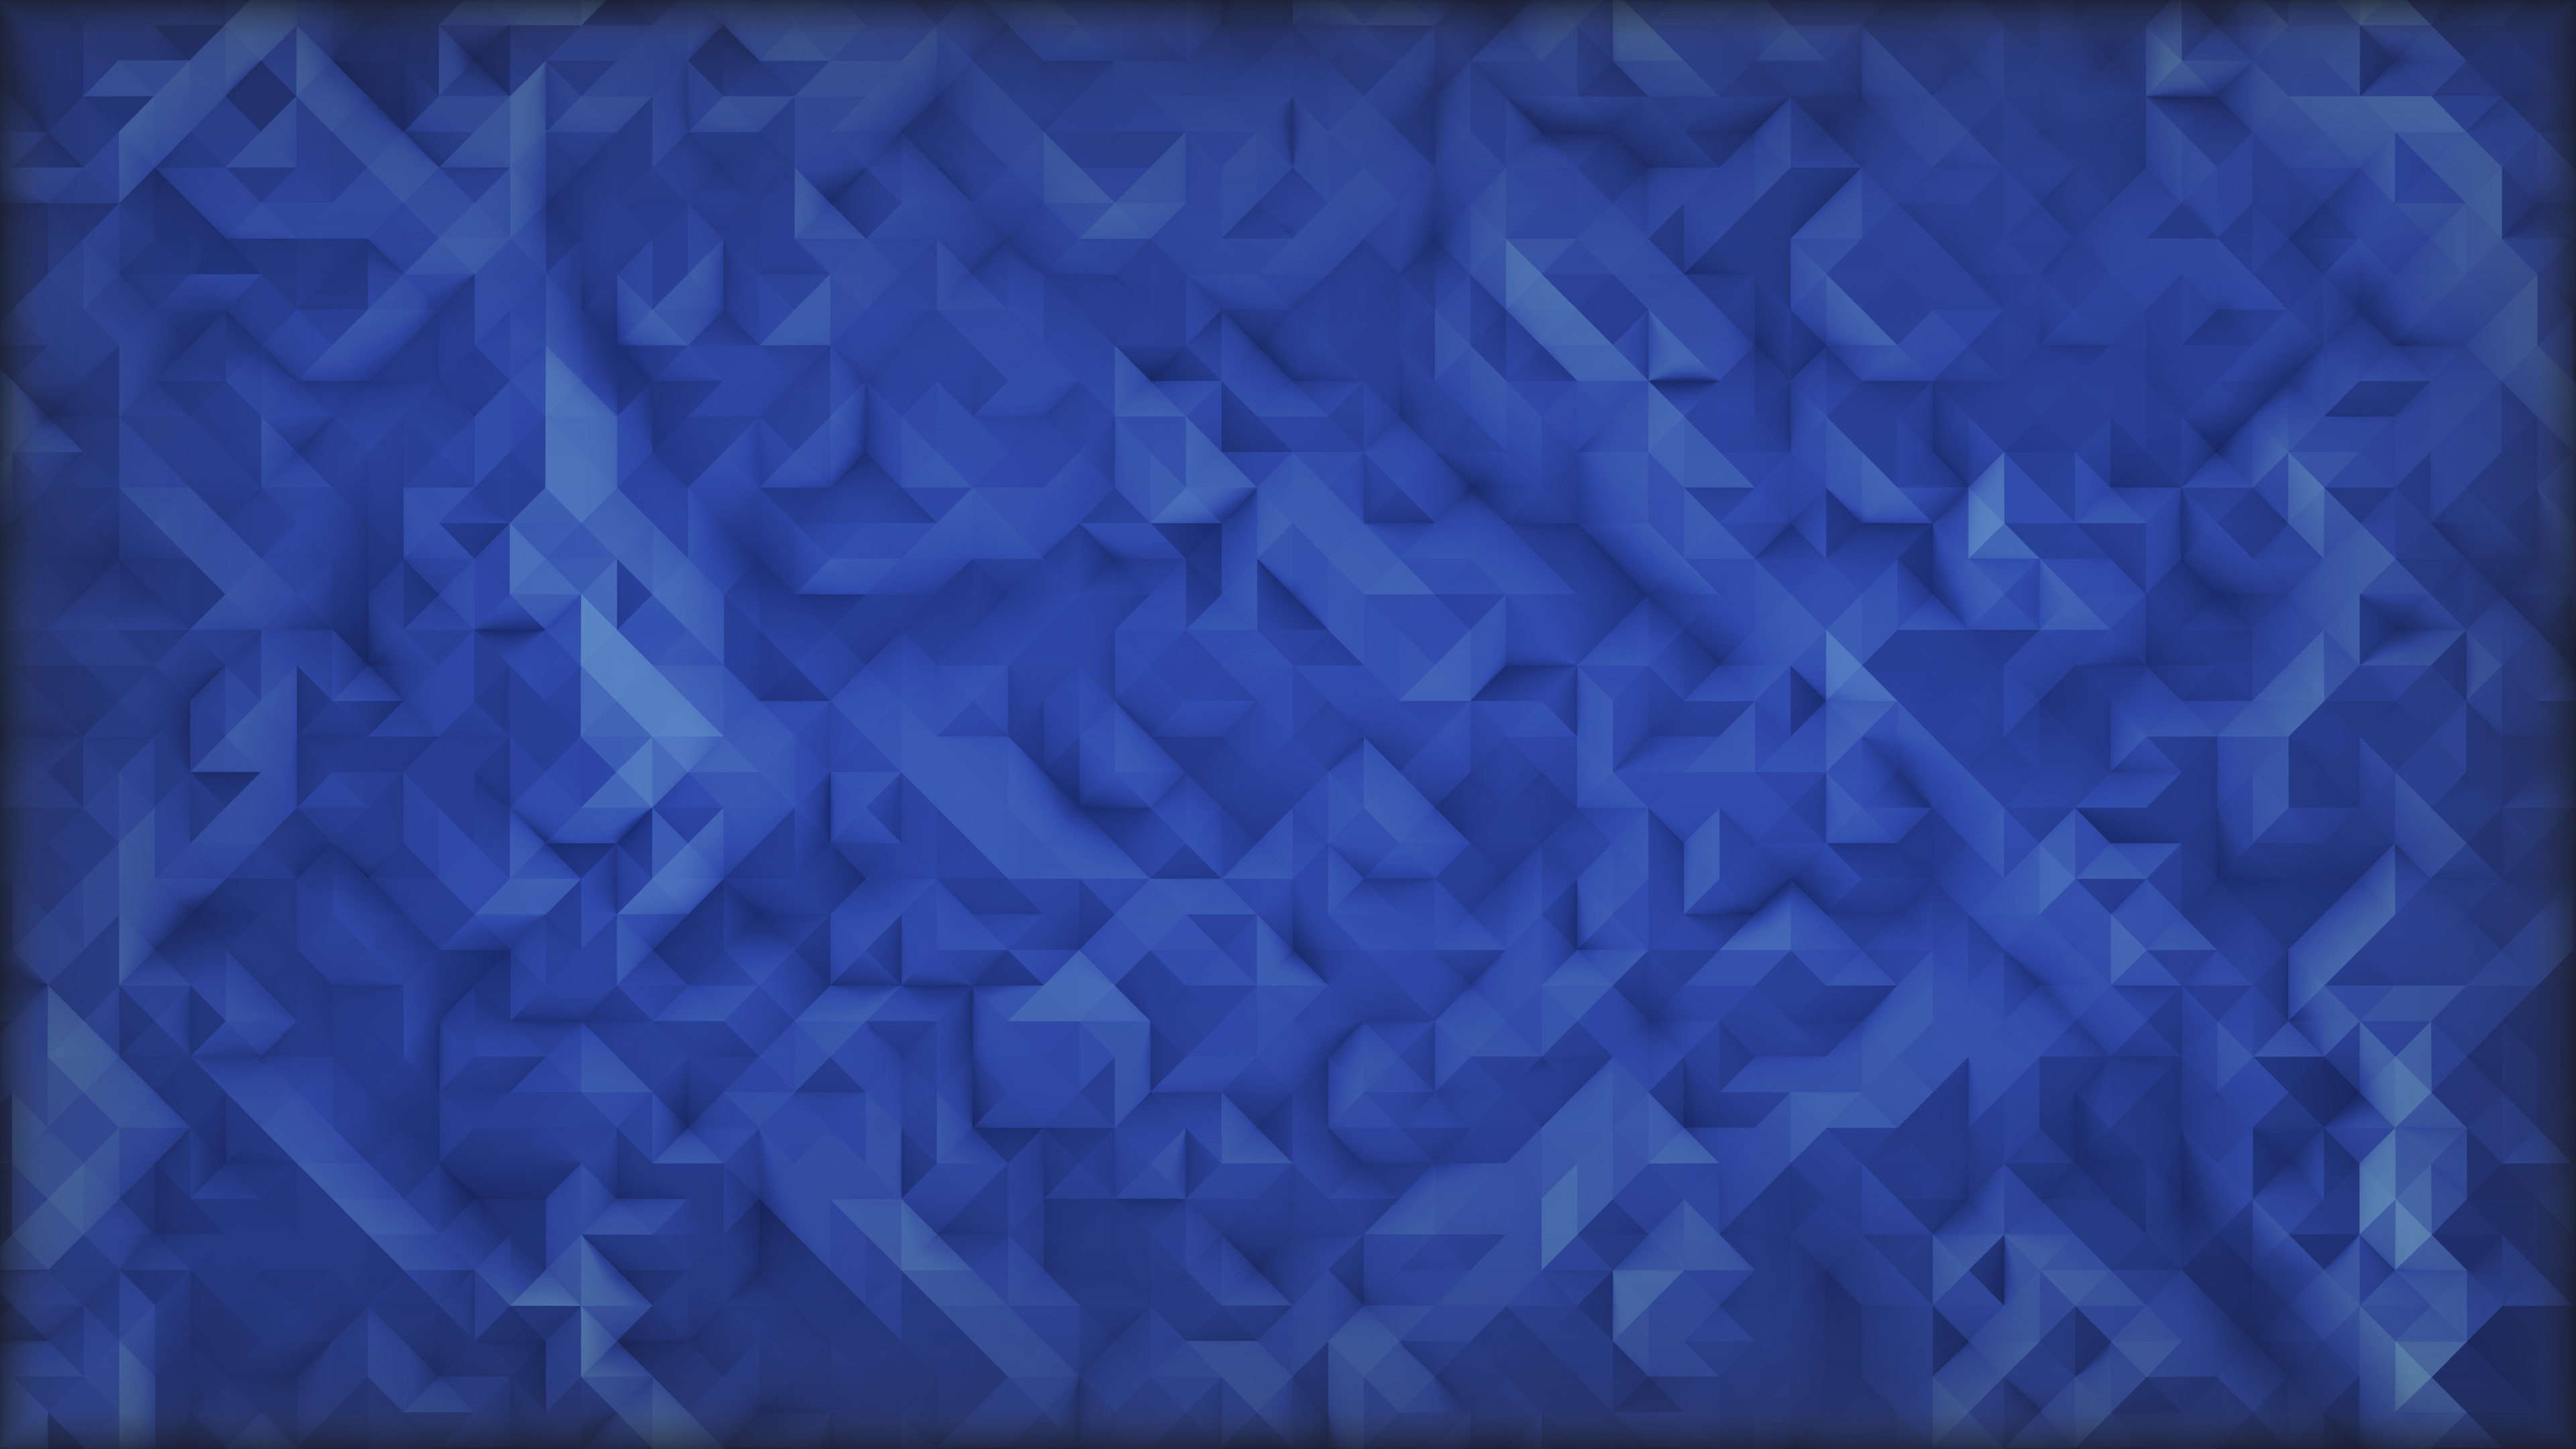 digital Art, Low Poly, Minimalism, 2D, Triangle, Simple, Abstract, Blue Background, Texture Wallpaper